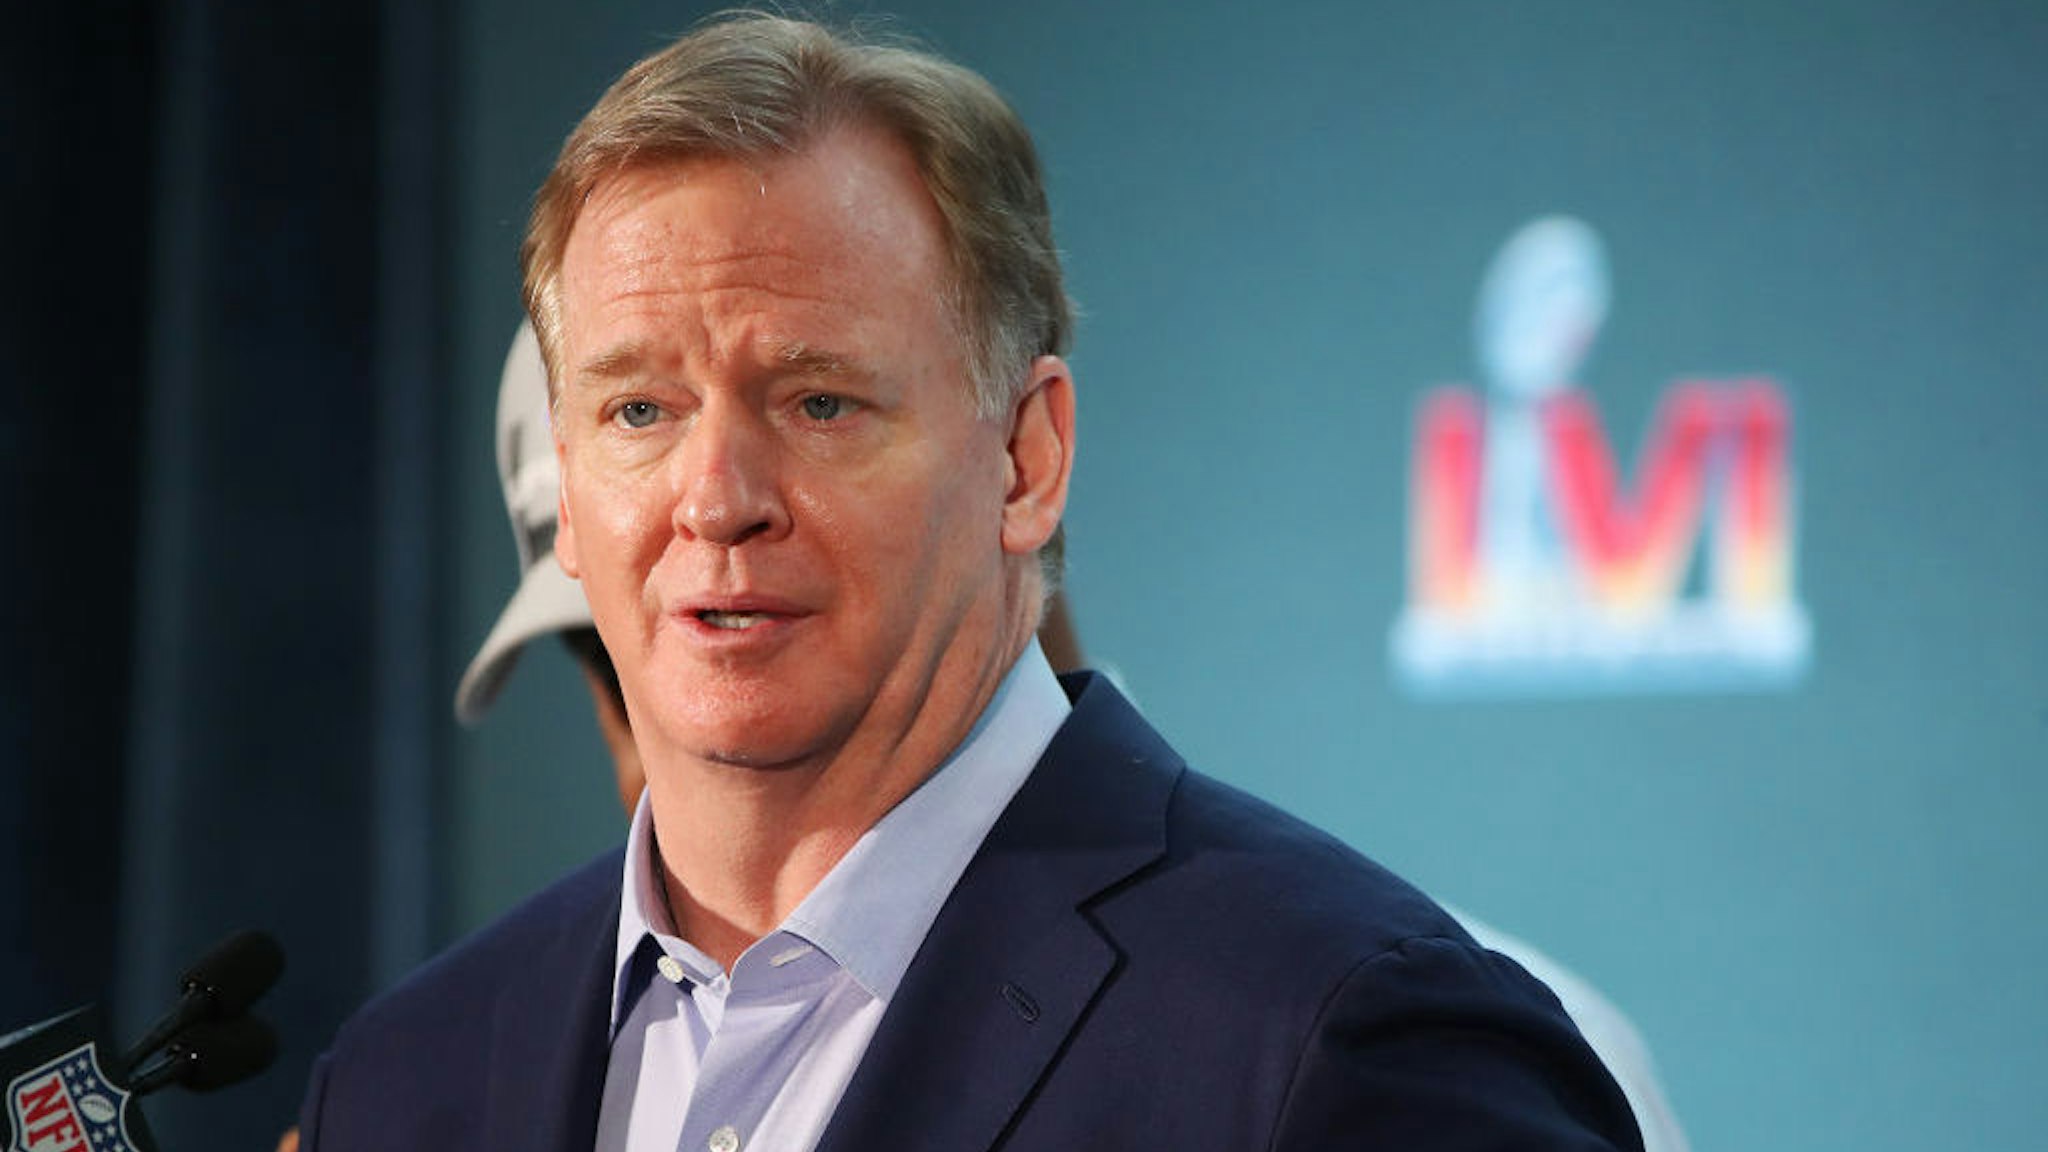 LOS ANGELES, CALIFORNIA - FEBRUARY 14: NFL Commissioner Roger Goodell speaks to the media during the Super Bowl LVI head coach and MVP press conference at Los Angeles Convention Center on February 14, 2022 in Los Angeles, California. (Photo by Katelyn Mulcahy/Getty Images)